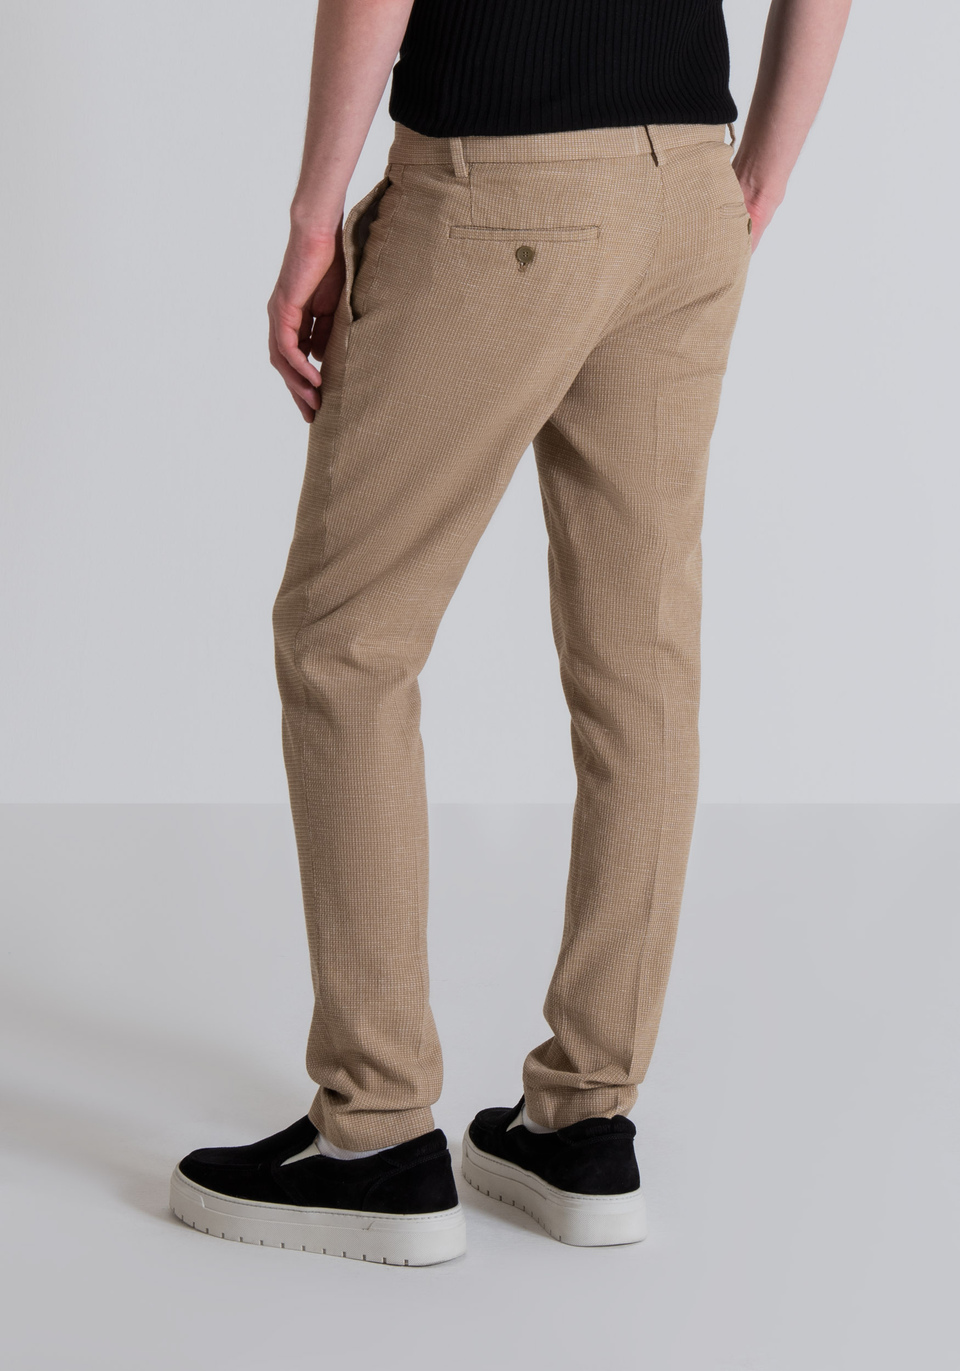 "BRYAN" SKINNY-FIT TROUSERS IN MICRO-WEAVE STRETCH LINEN BLEND - Antony Morato Online Shop